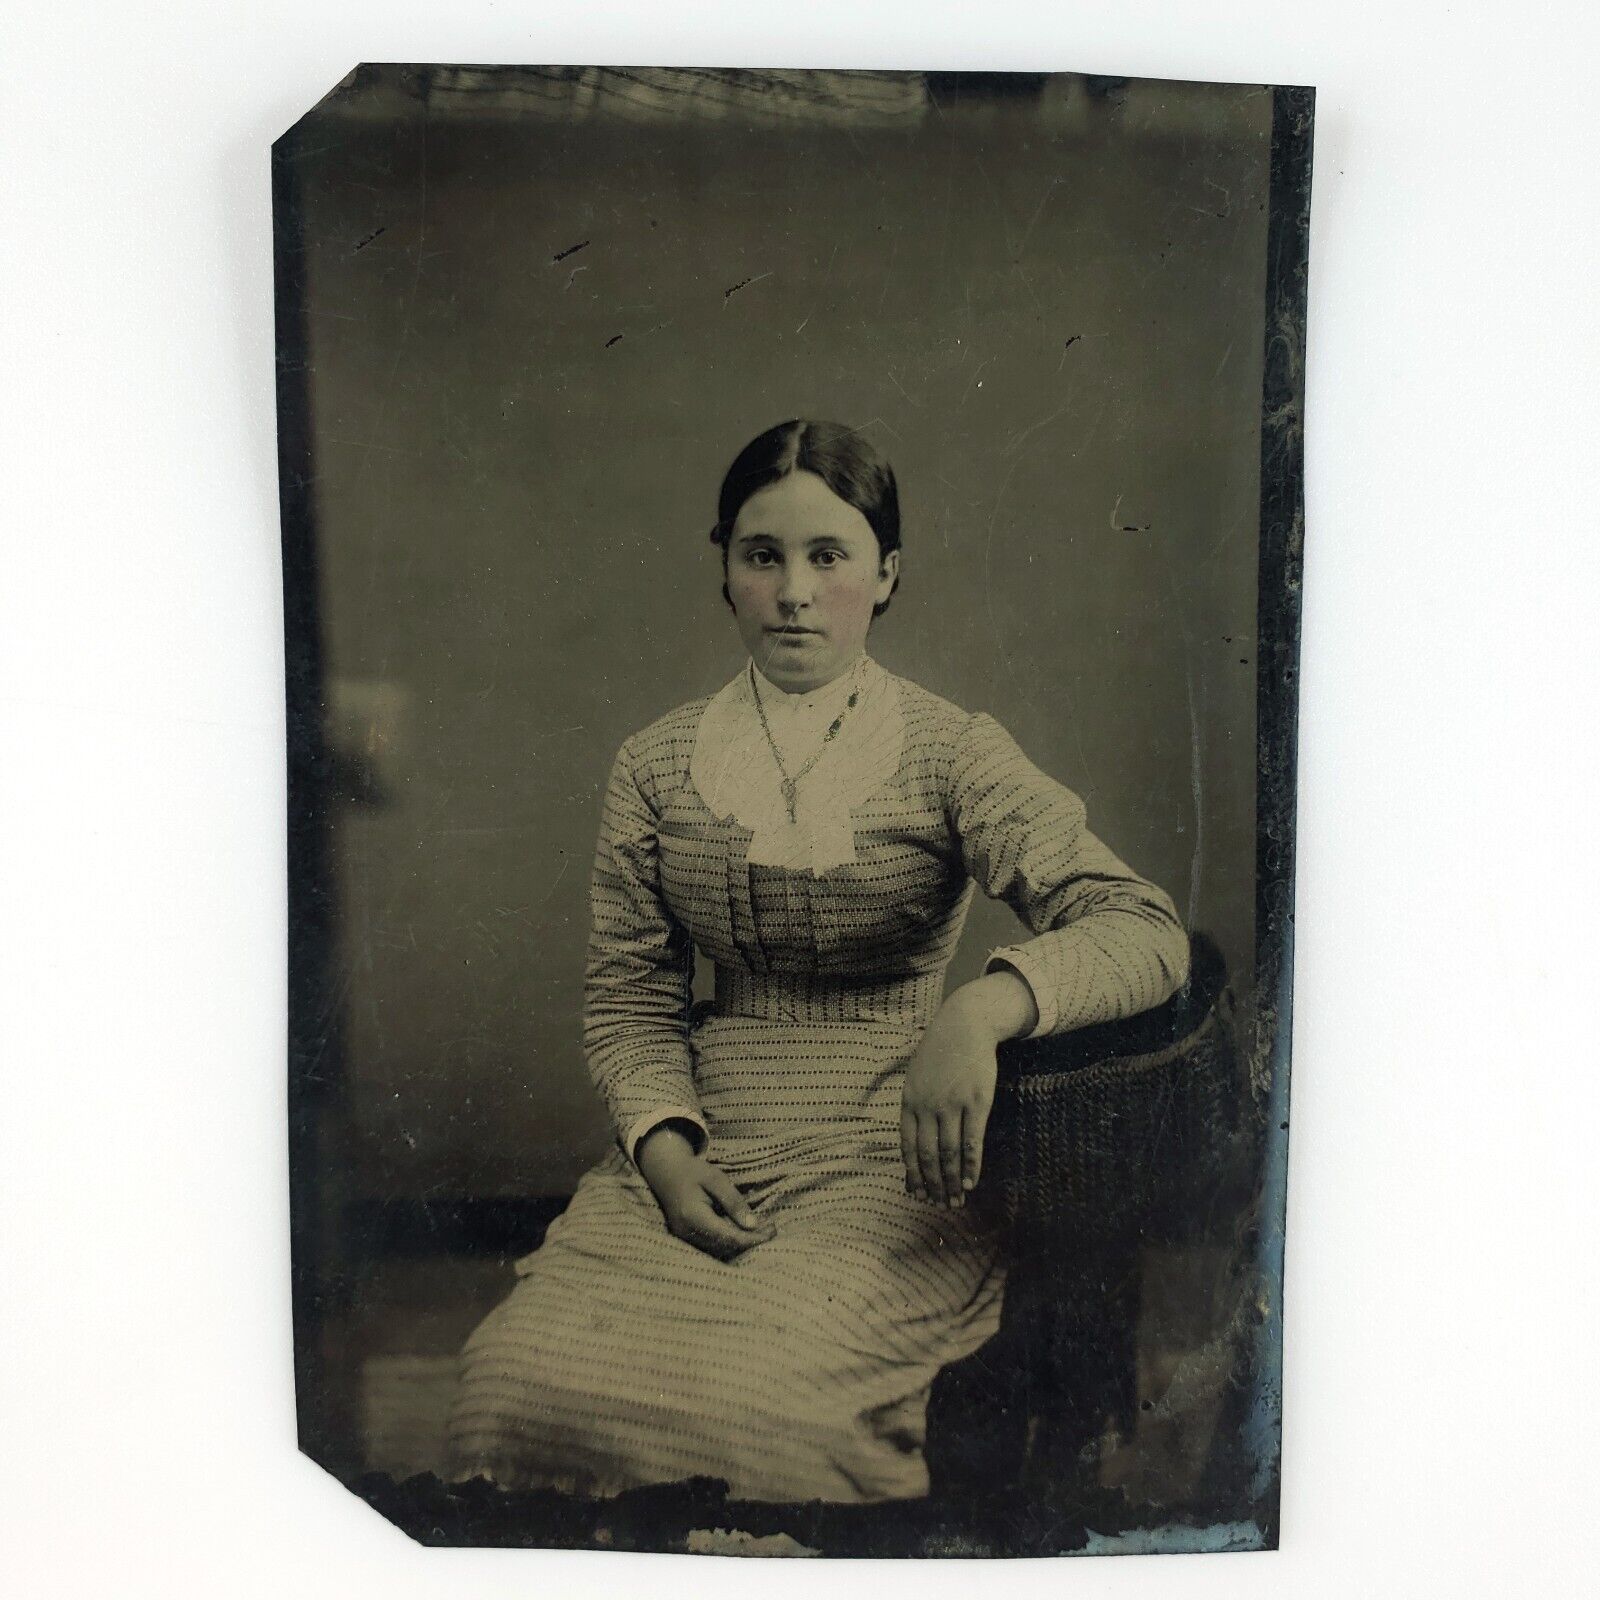 Seated Girl Photographer's Chair Tintype c1870 Antique 1/6 Plate Photo B2844